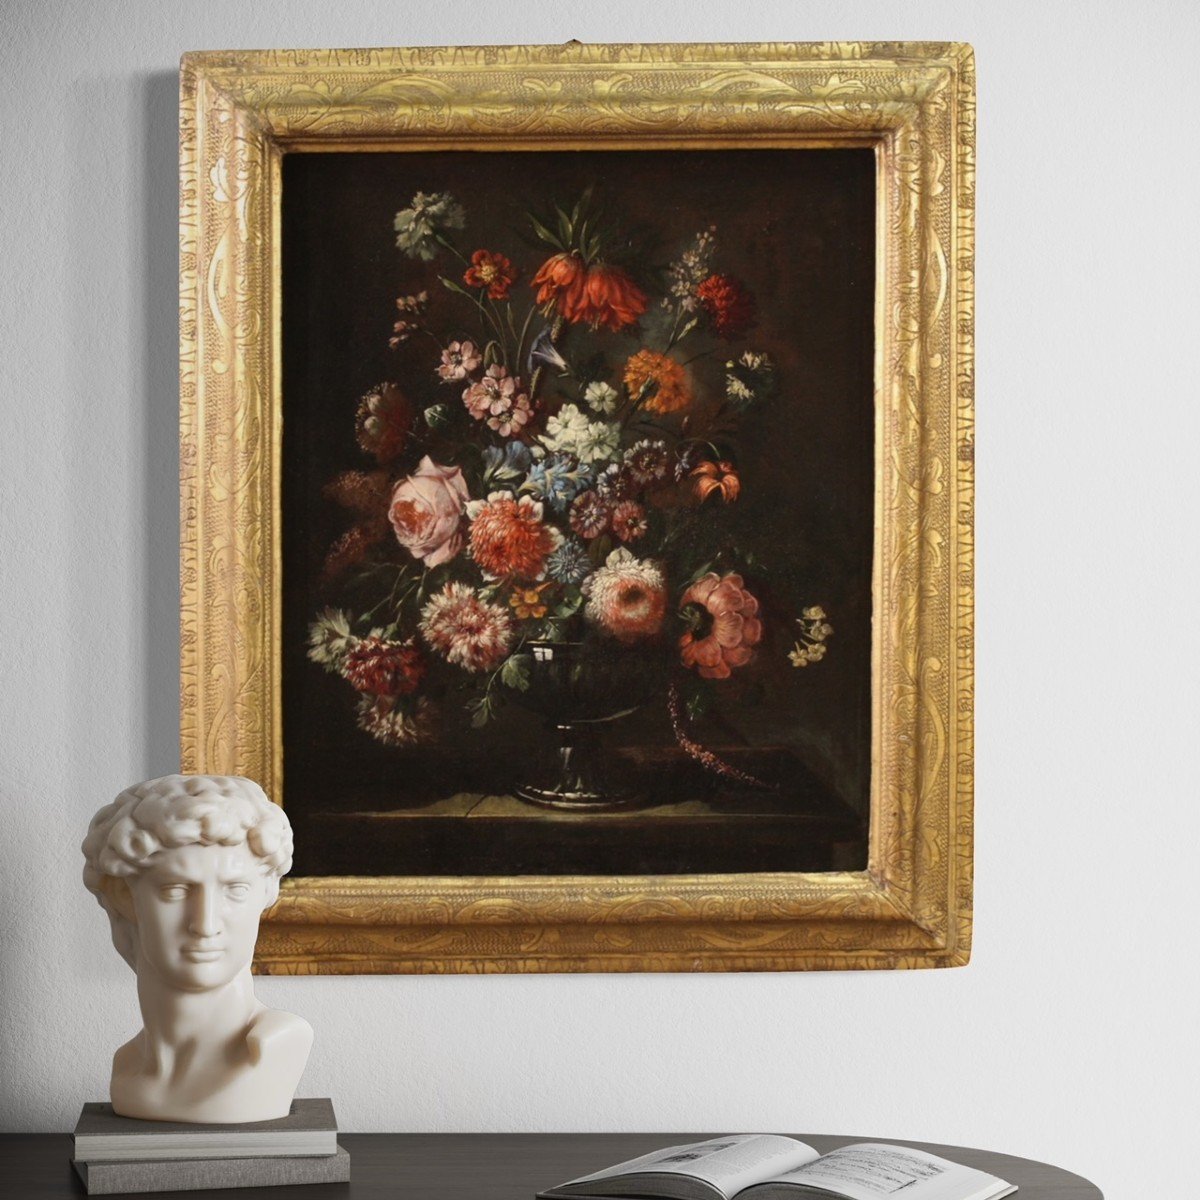 Still Life Painting Vase Of Flowers With Contemporary Frame From 17th Century-photo-3